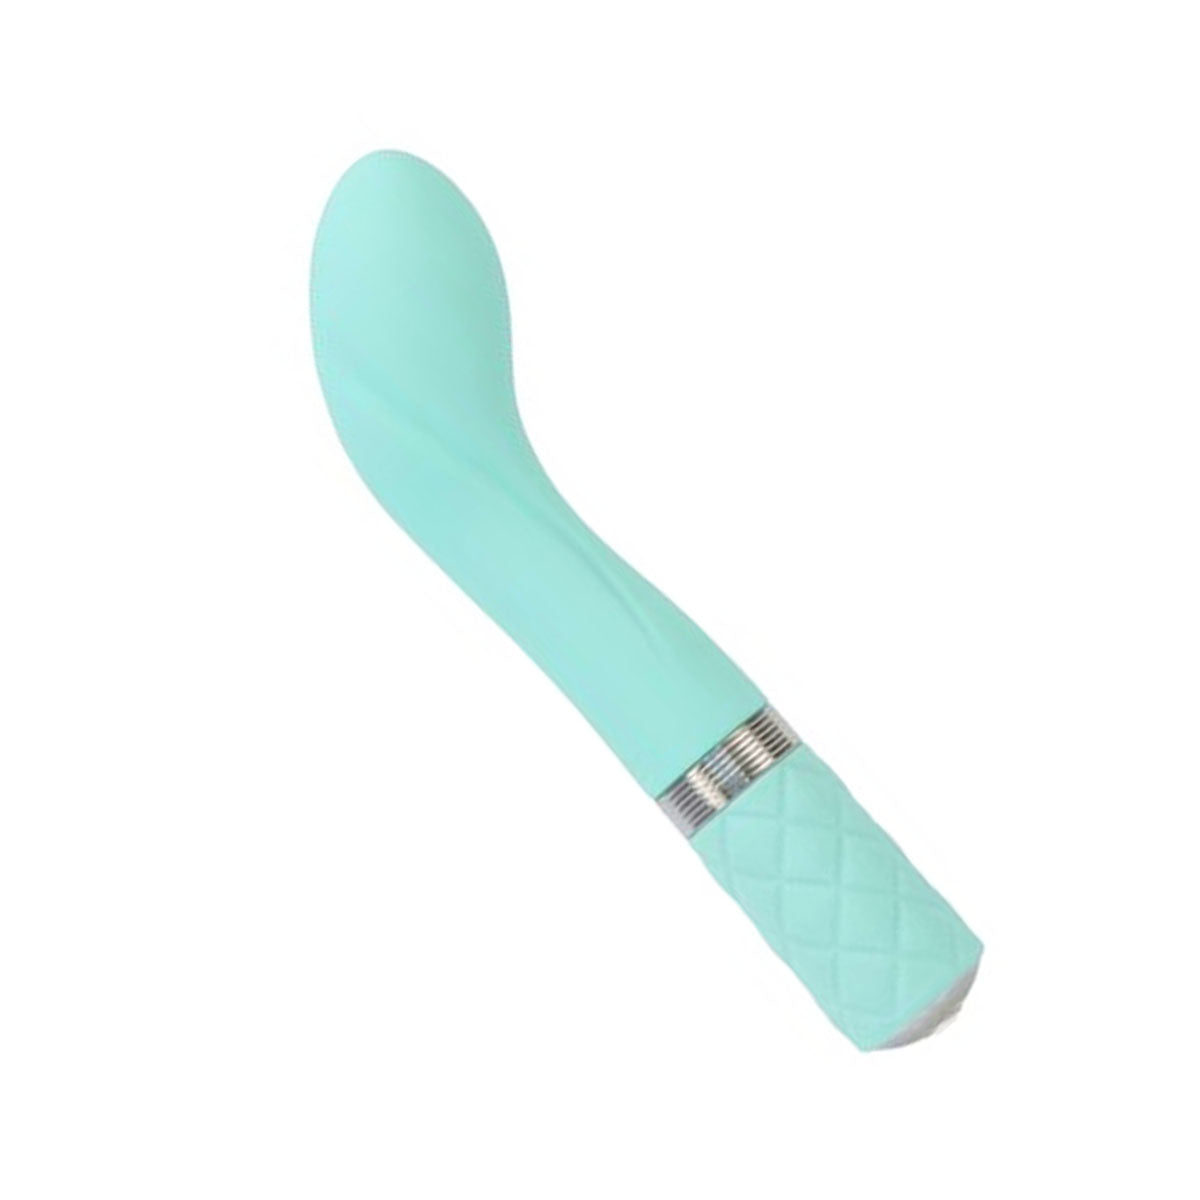 Bright teal G-spot vibrator with curved tip and padded handle Nudie Co